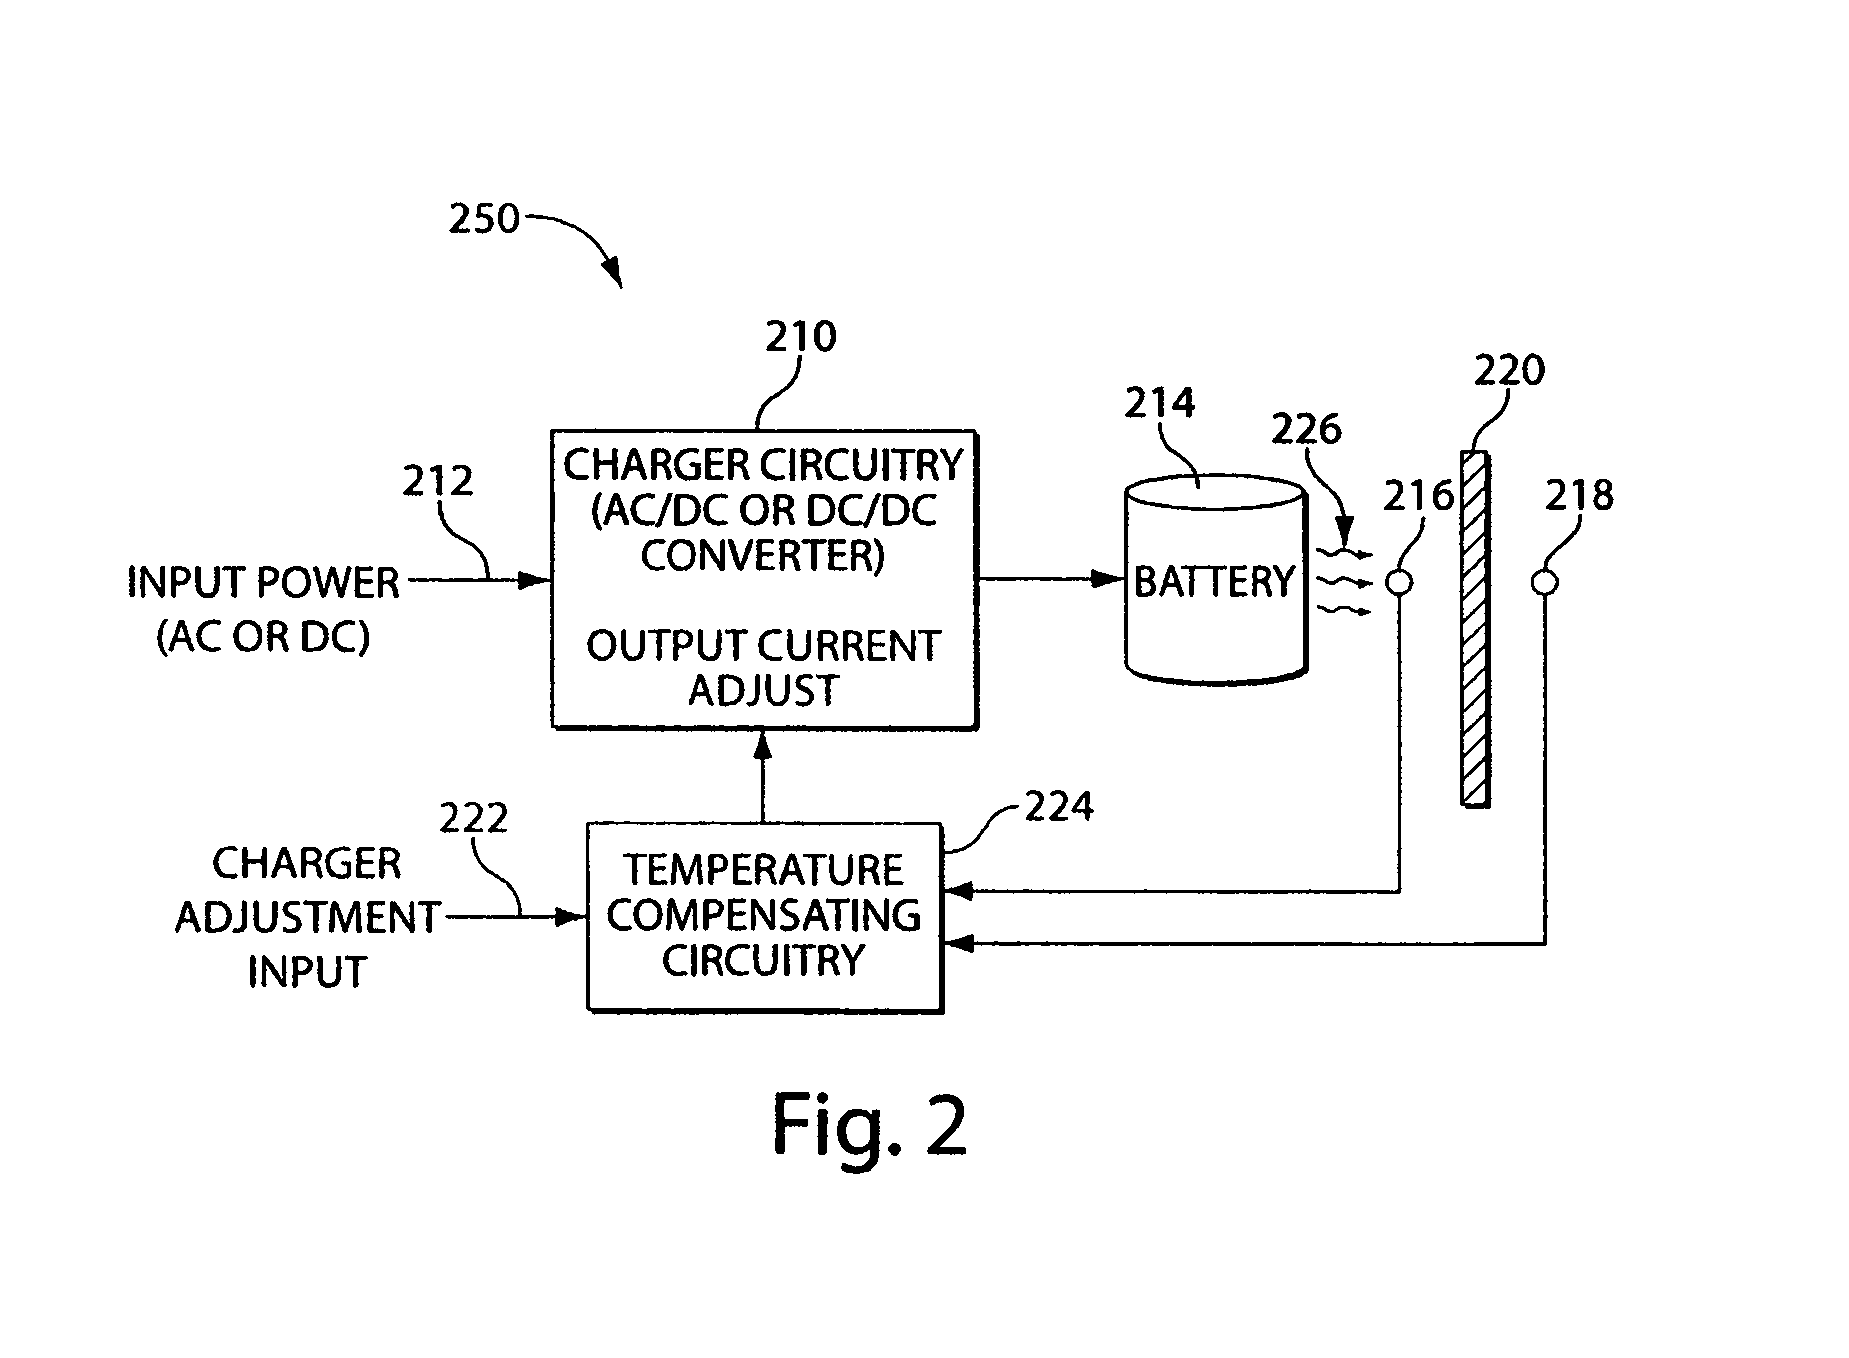 Method and system for charging a NiMH or NiCd battery